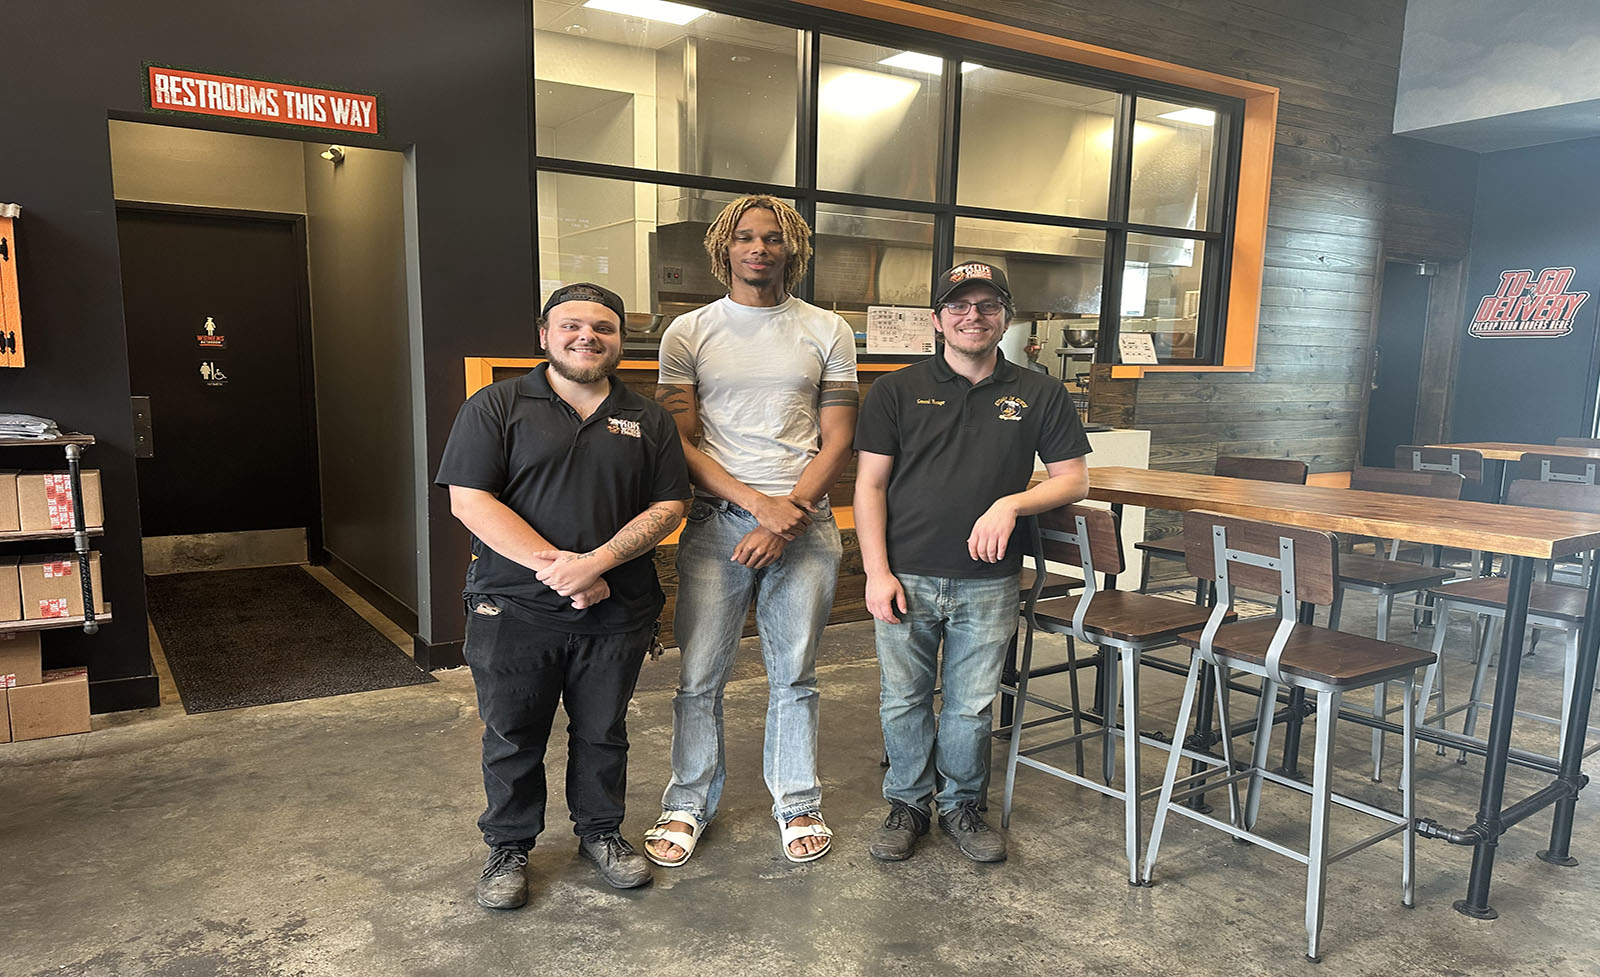 KOK Wings & Things owner Tre'jan Vison (center) with employee (left) and general manager (right).